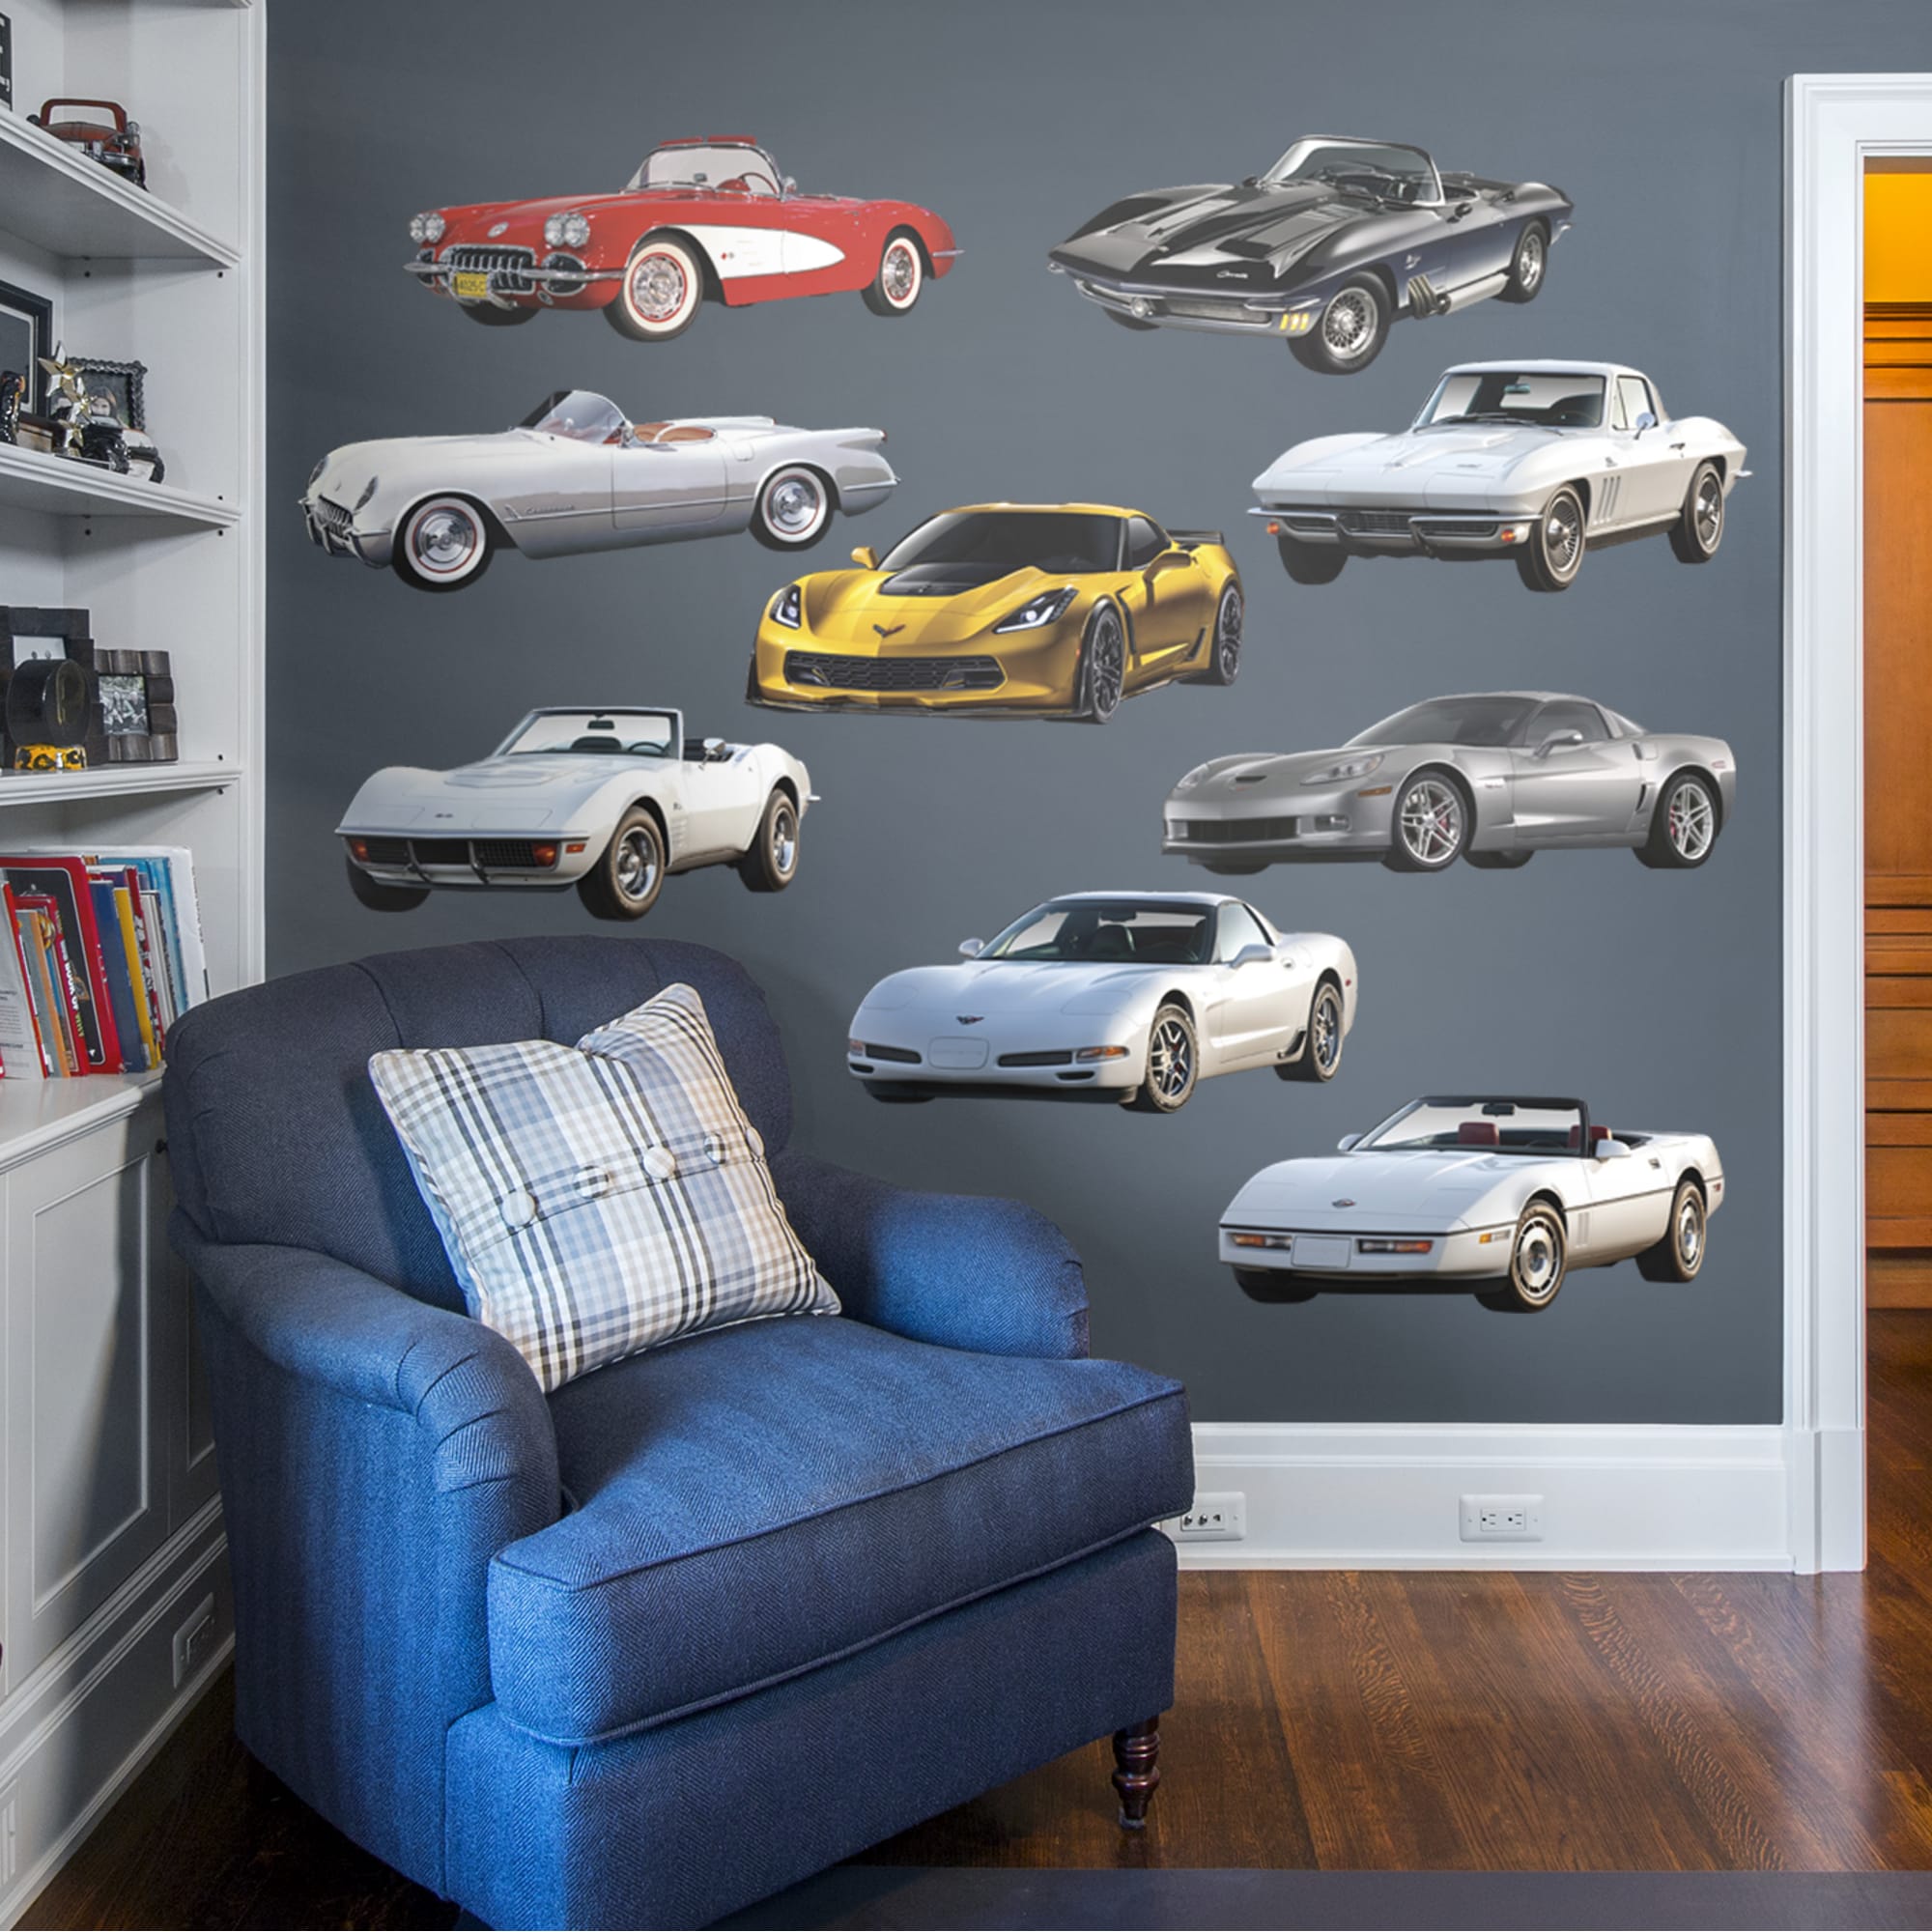 Chevrolet: Corvette Generations Collection - Officially Licensed Removable Wall Decal 32.0"W x 12.0"H by Fathead | Vinyl